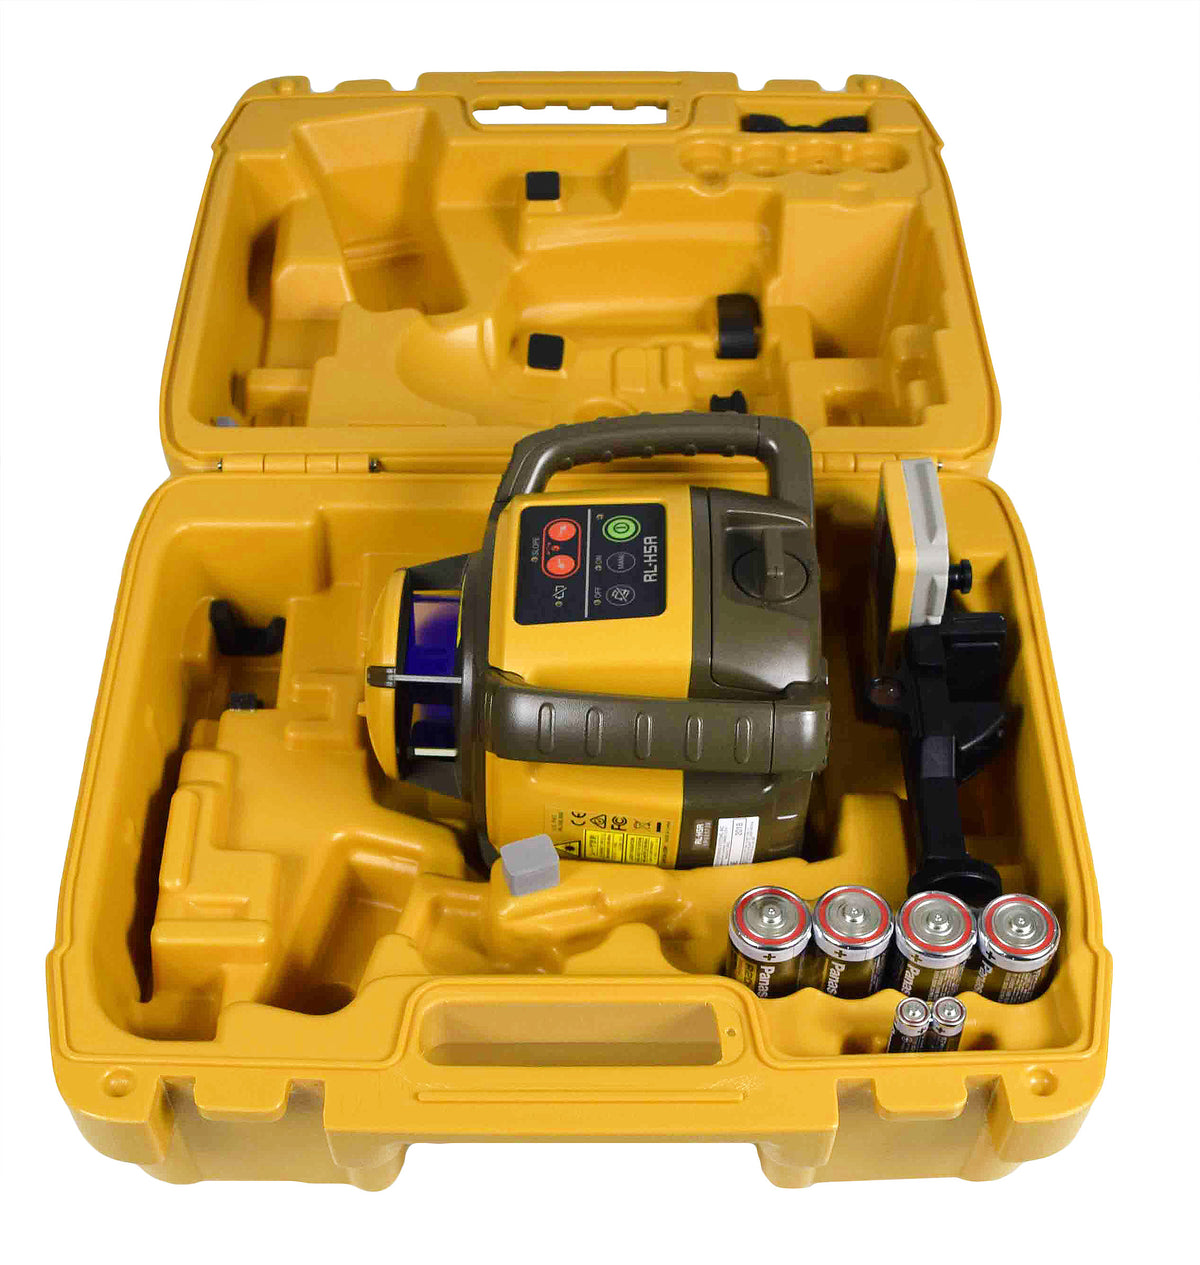 Topcon 1021200-07 RL-H5A Horizontal Self-Leveling Rotary Laser LS-80X Receiver